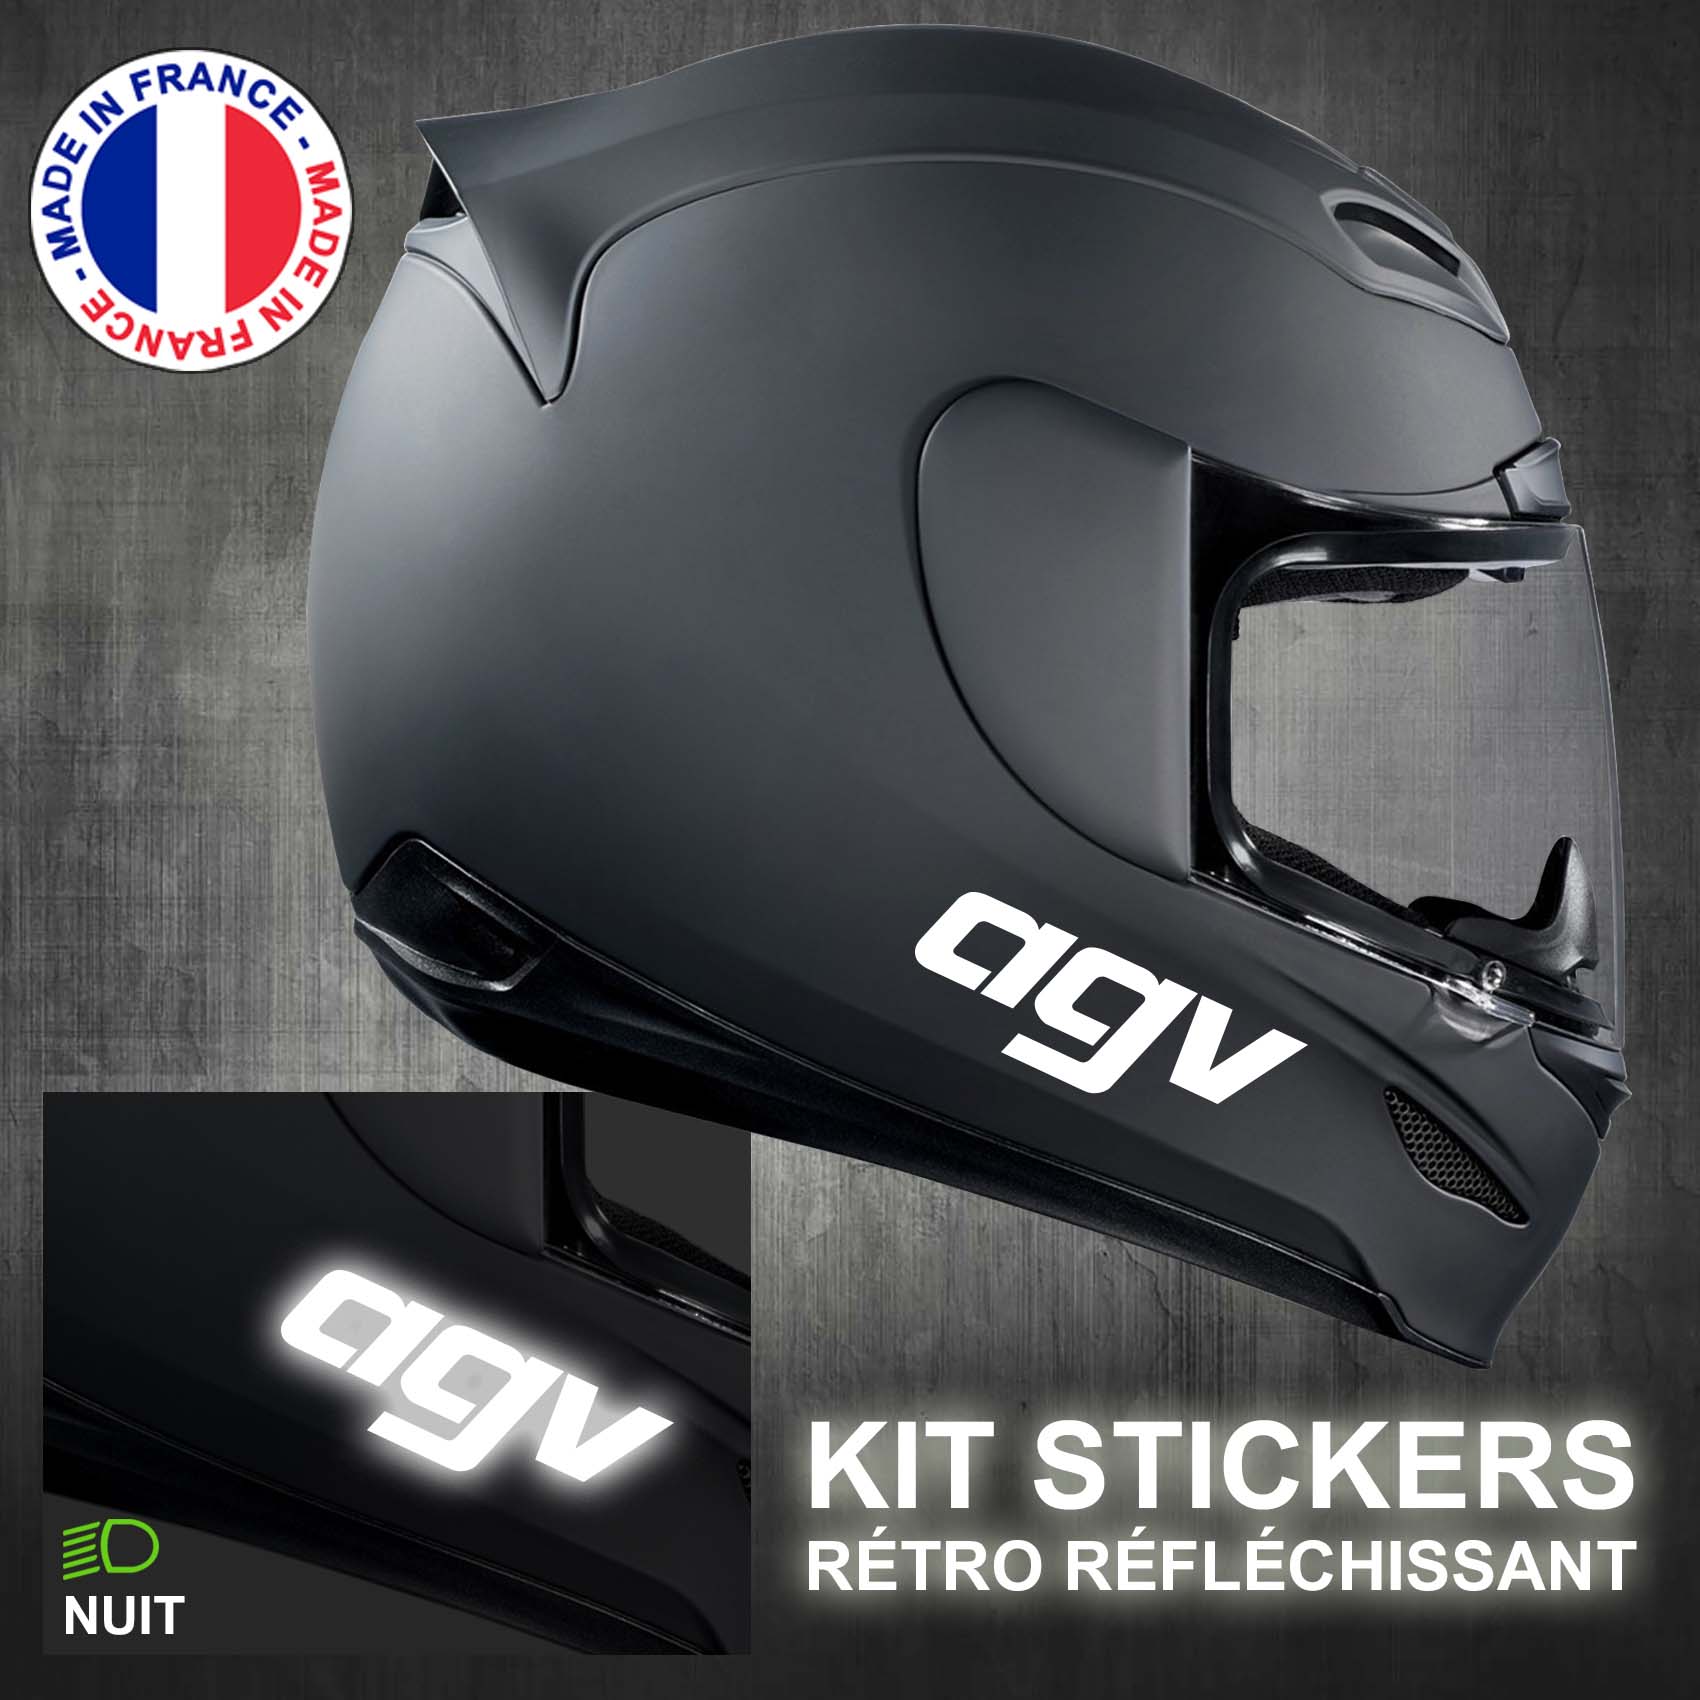 stickers-casque-moto-agv-ref2-retro-reflechissant-autocollant-noir-moto-velo-tuning-racing-route-sticker-casques-adhesif-scooter-nuit-securite-decals-personnalise-personnalisable-min